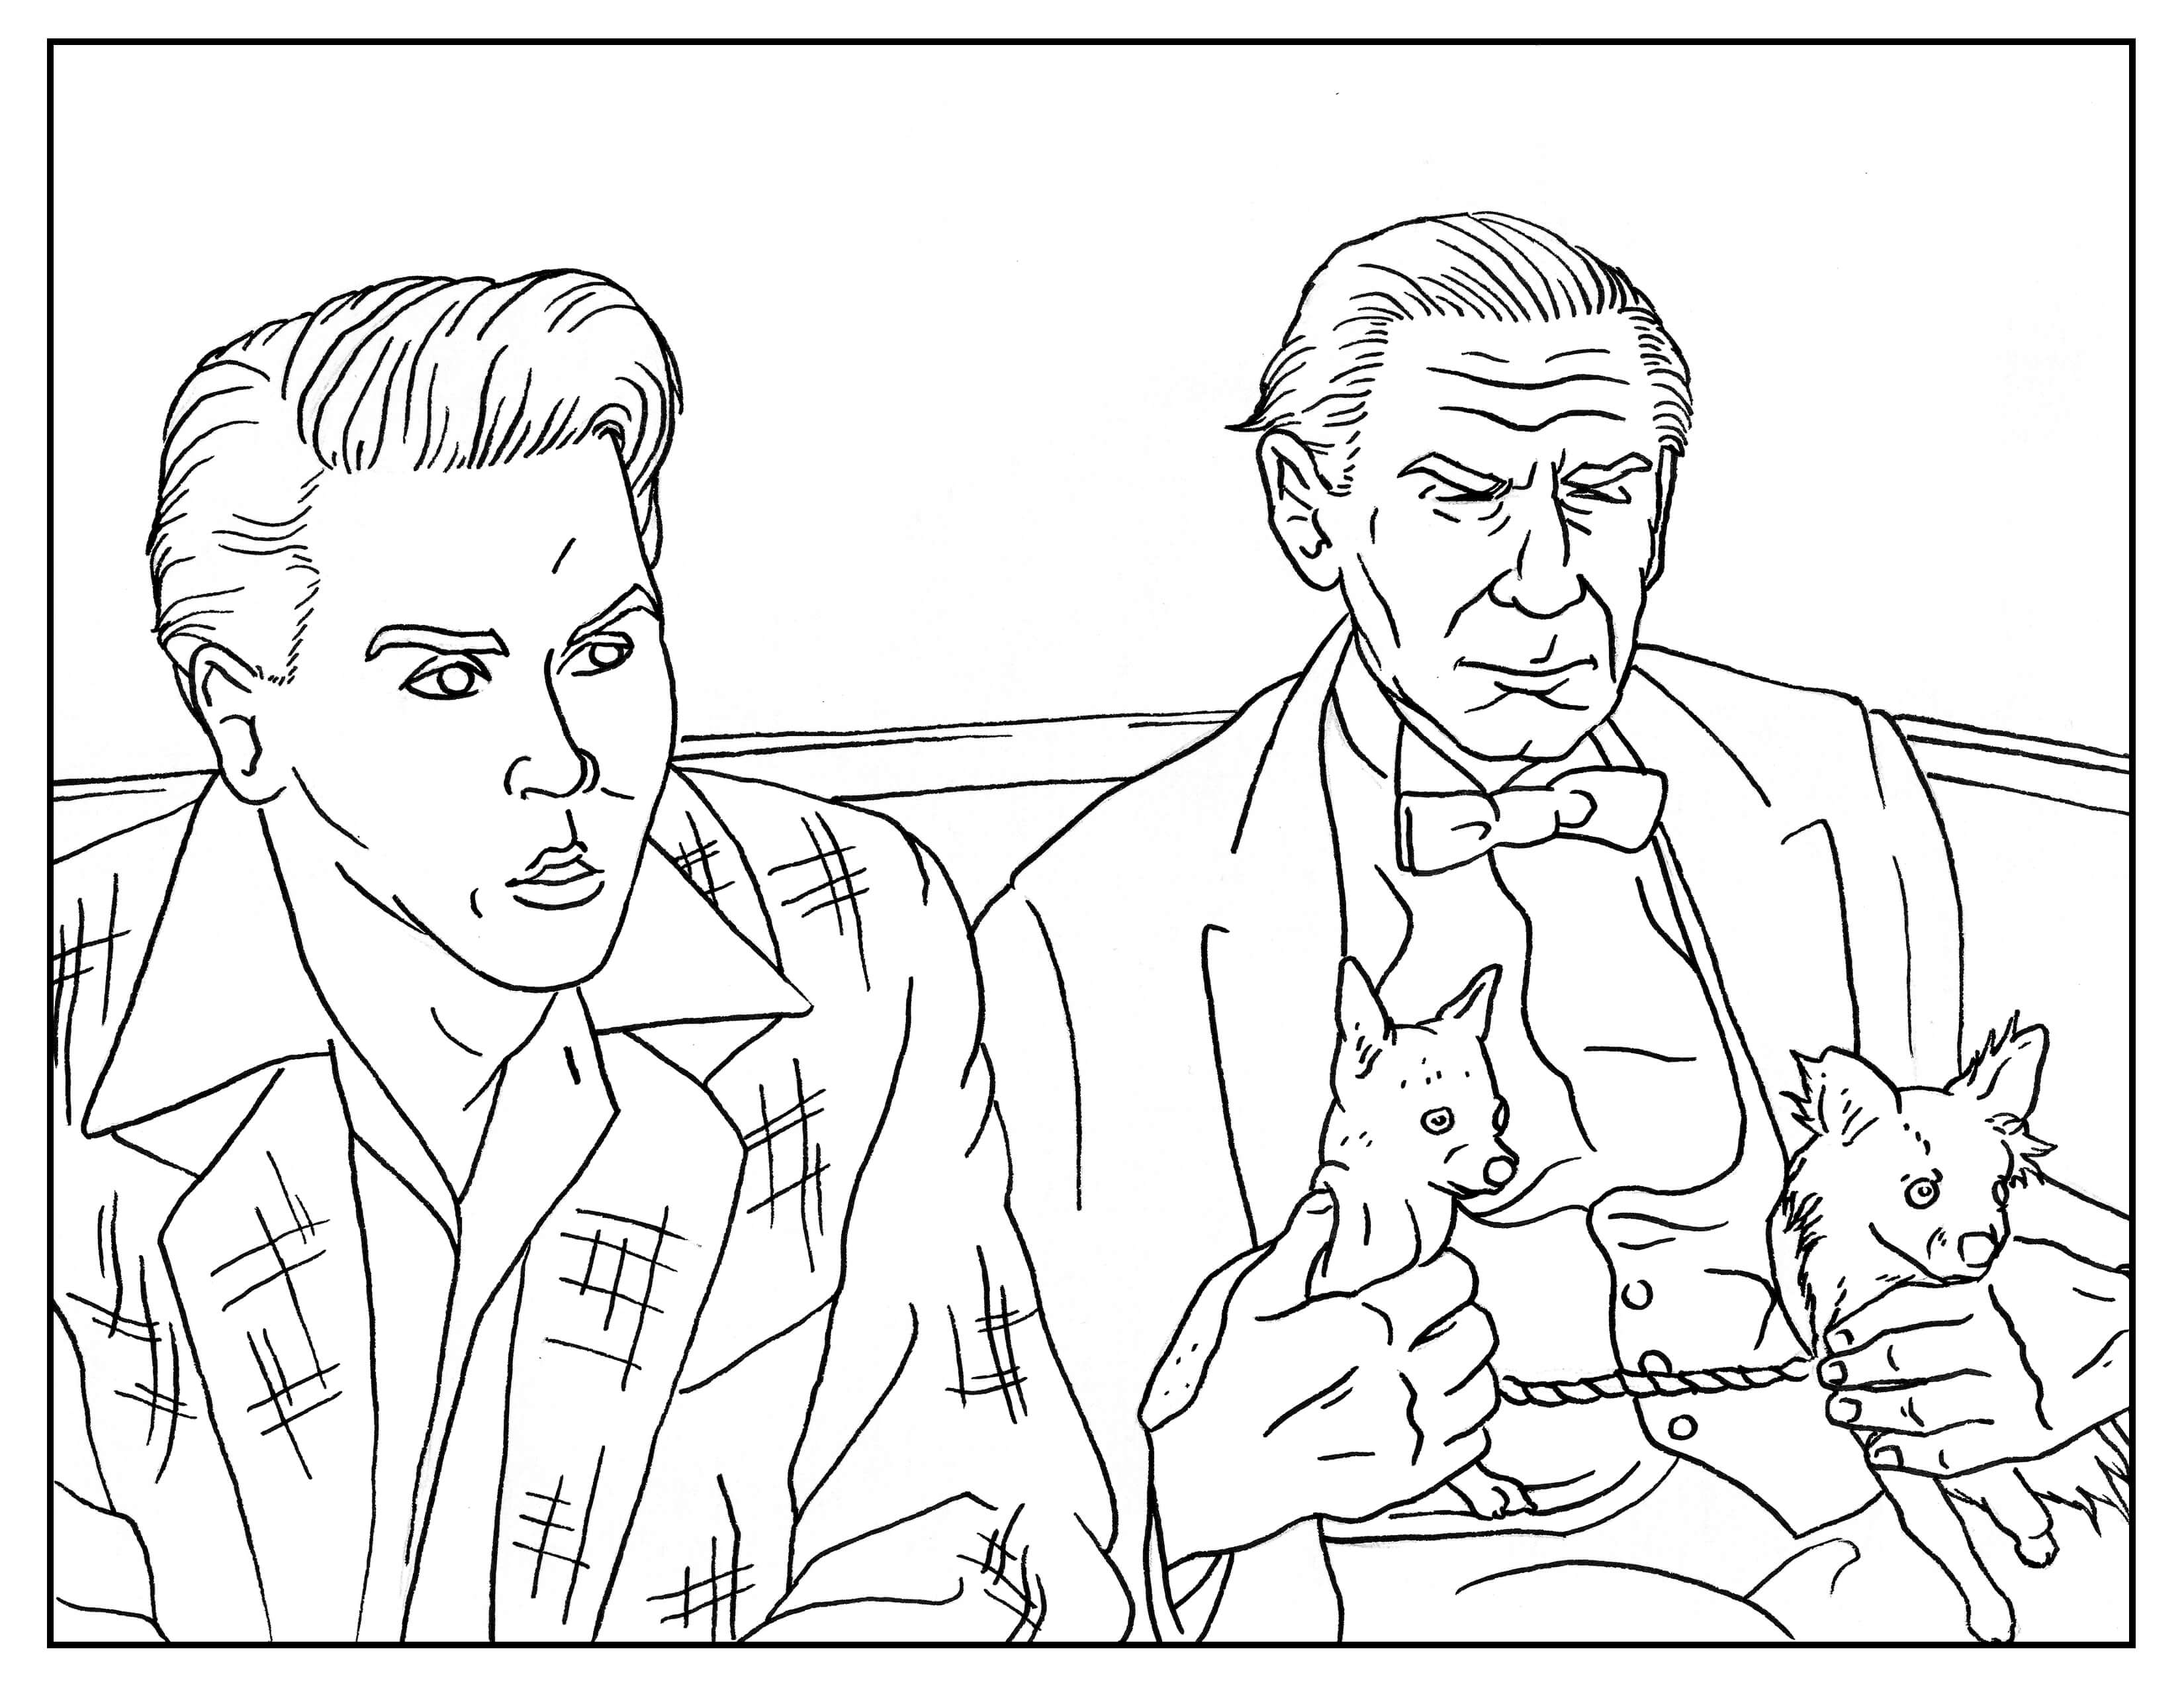 Coloring page inspired by Tim Burton's movie Ed Wood, with Johnny Depp